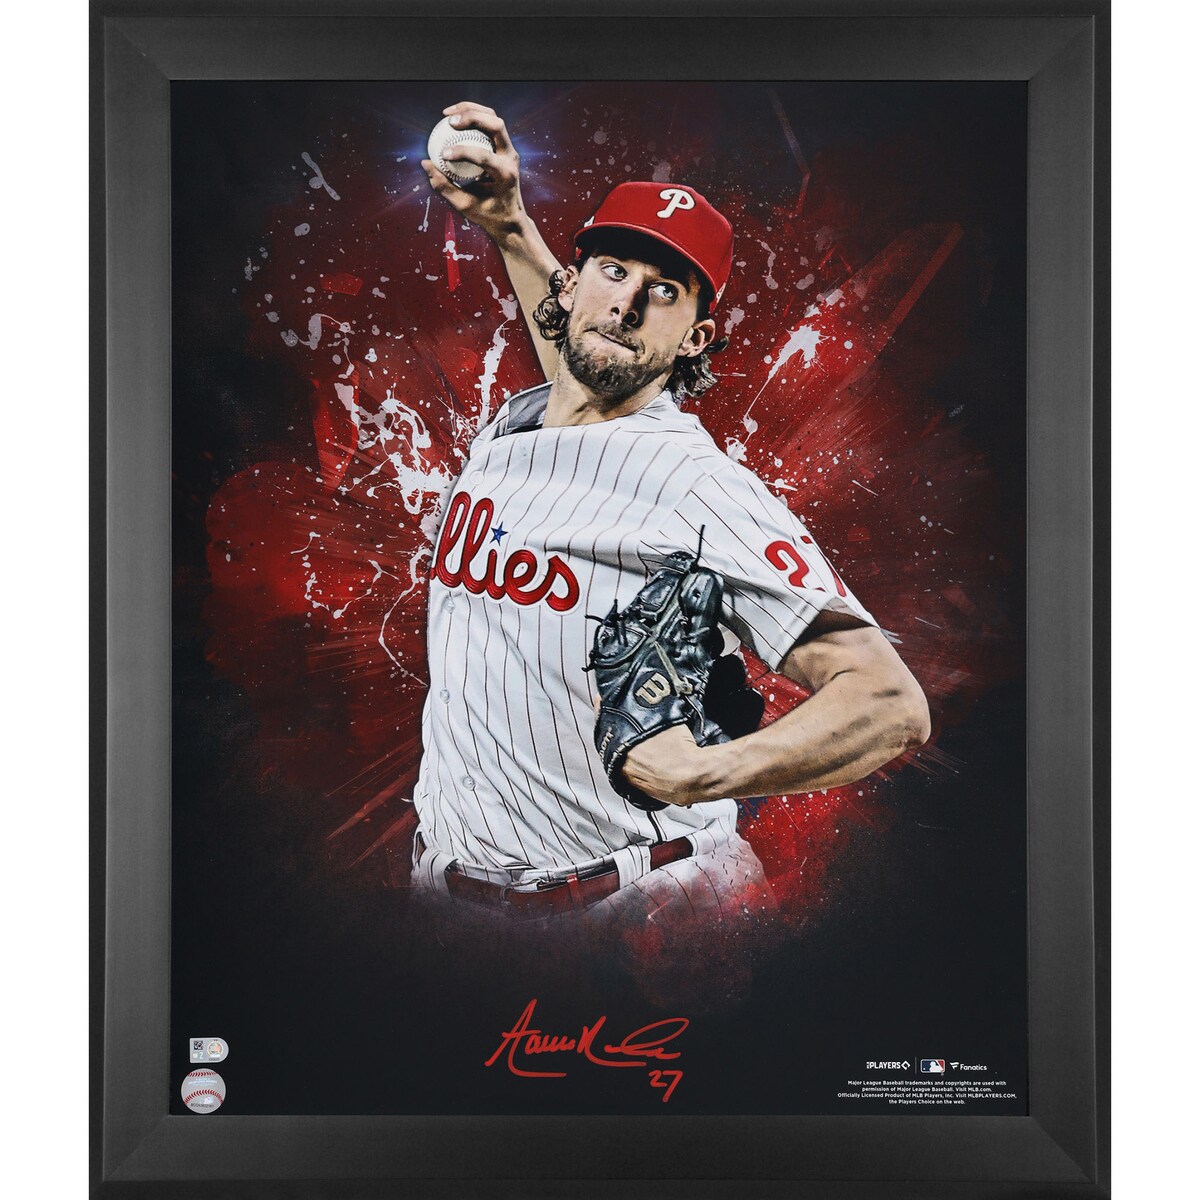 If Aaron Nola is your favorite player on the Philadelphia Phillies, then be sure to pick up this autographed Framed 20" ...